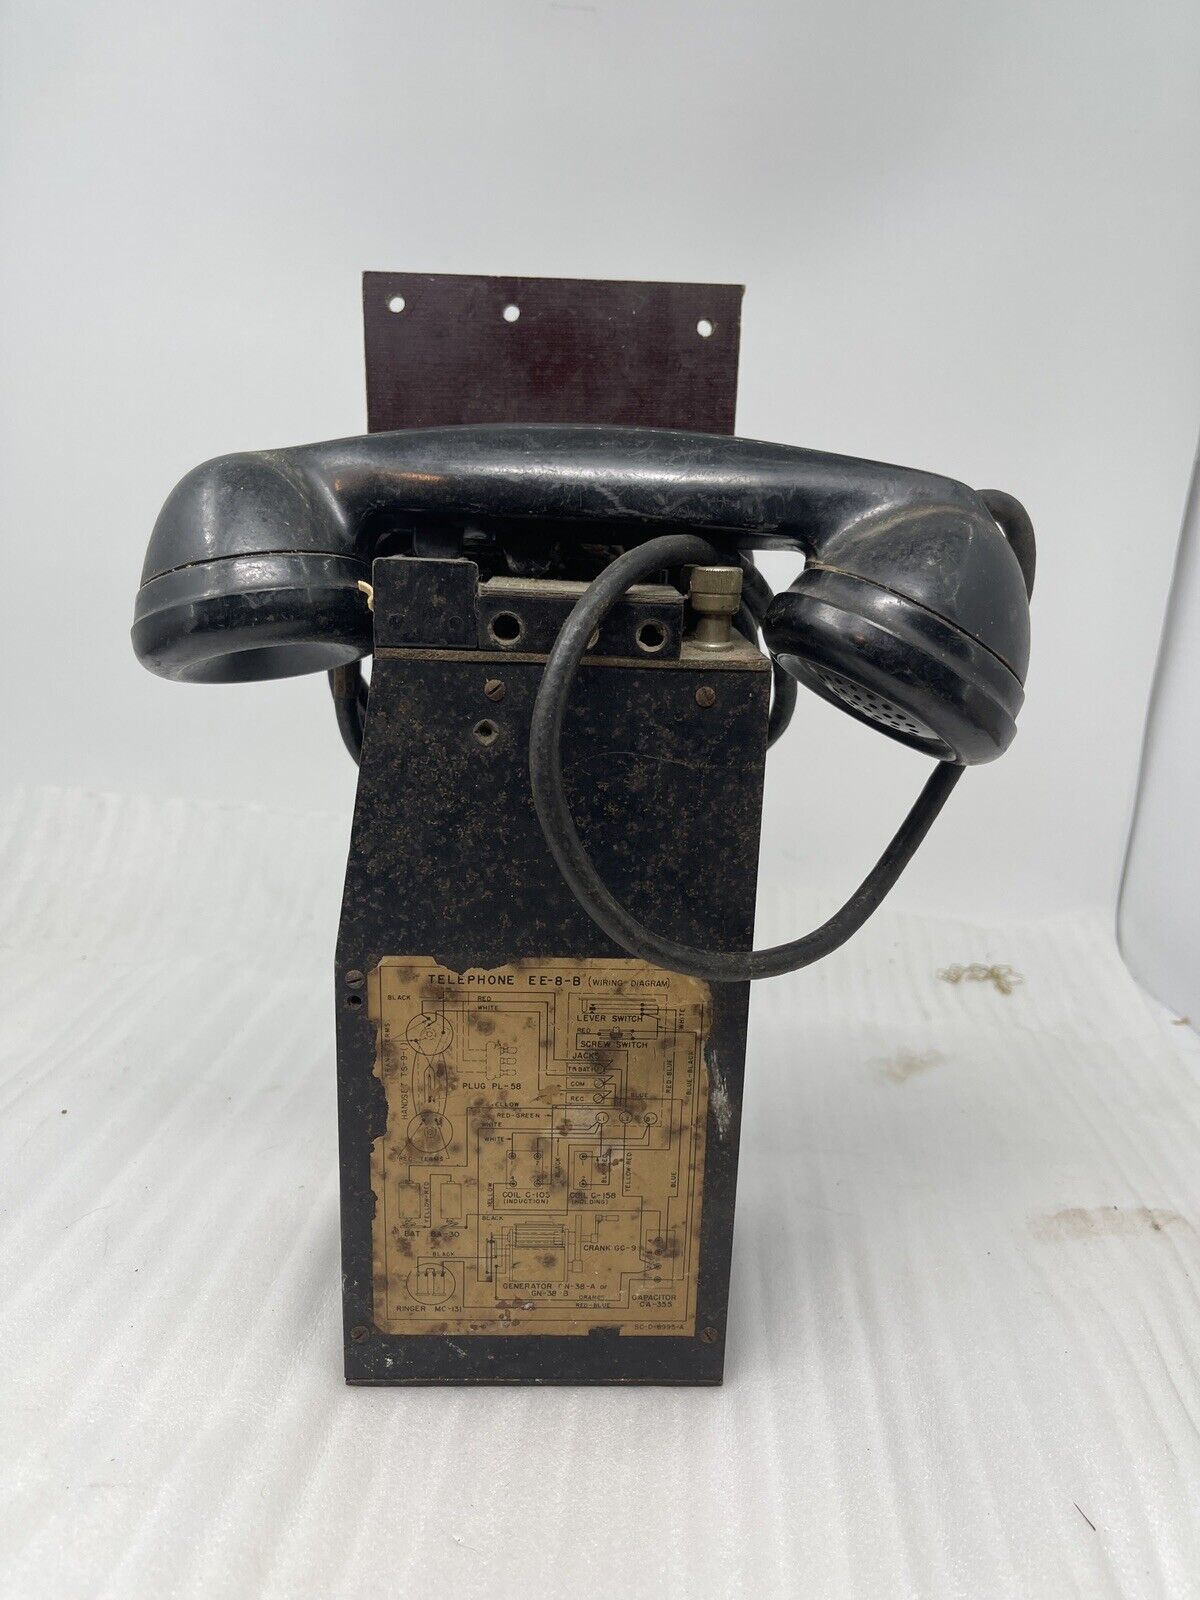 Vintage Signal Corps US Army Military Field Phone EE-8-B Telephone 1944 WW2 WWII